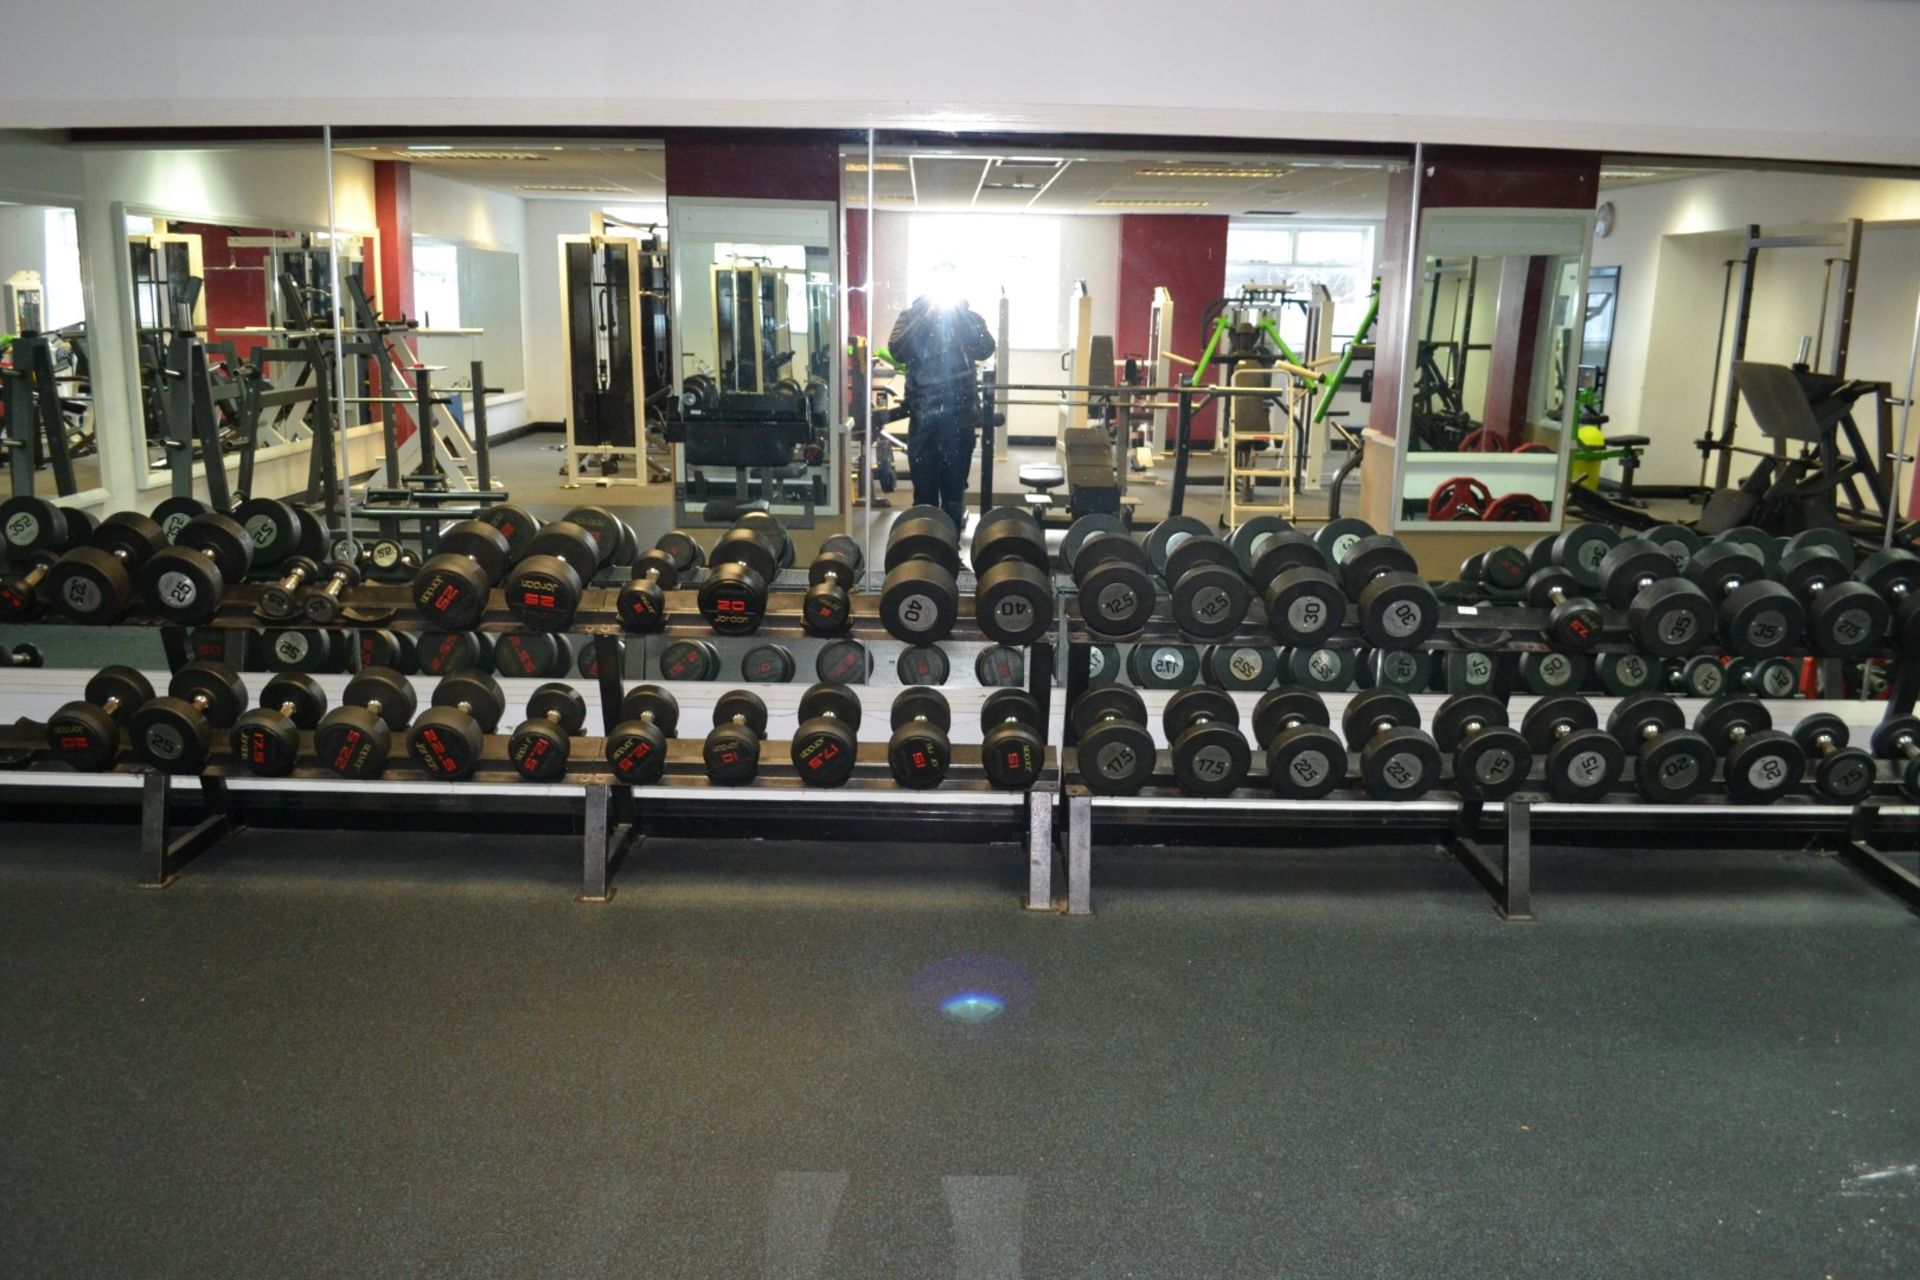 1 x Large Dumbells Rack With Approx 42 x Dumbell 5-40kg Weights - Ref: J2104/GFG - CL356 - Location: - Image 3 of 5